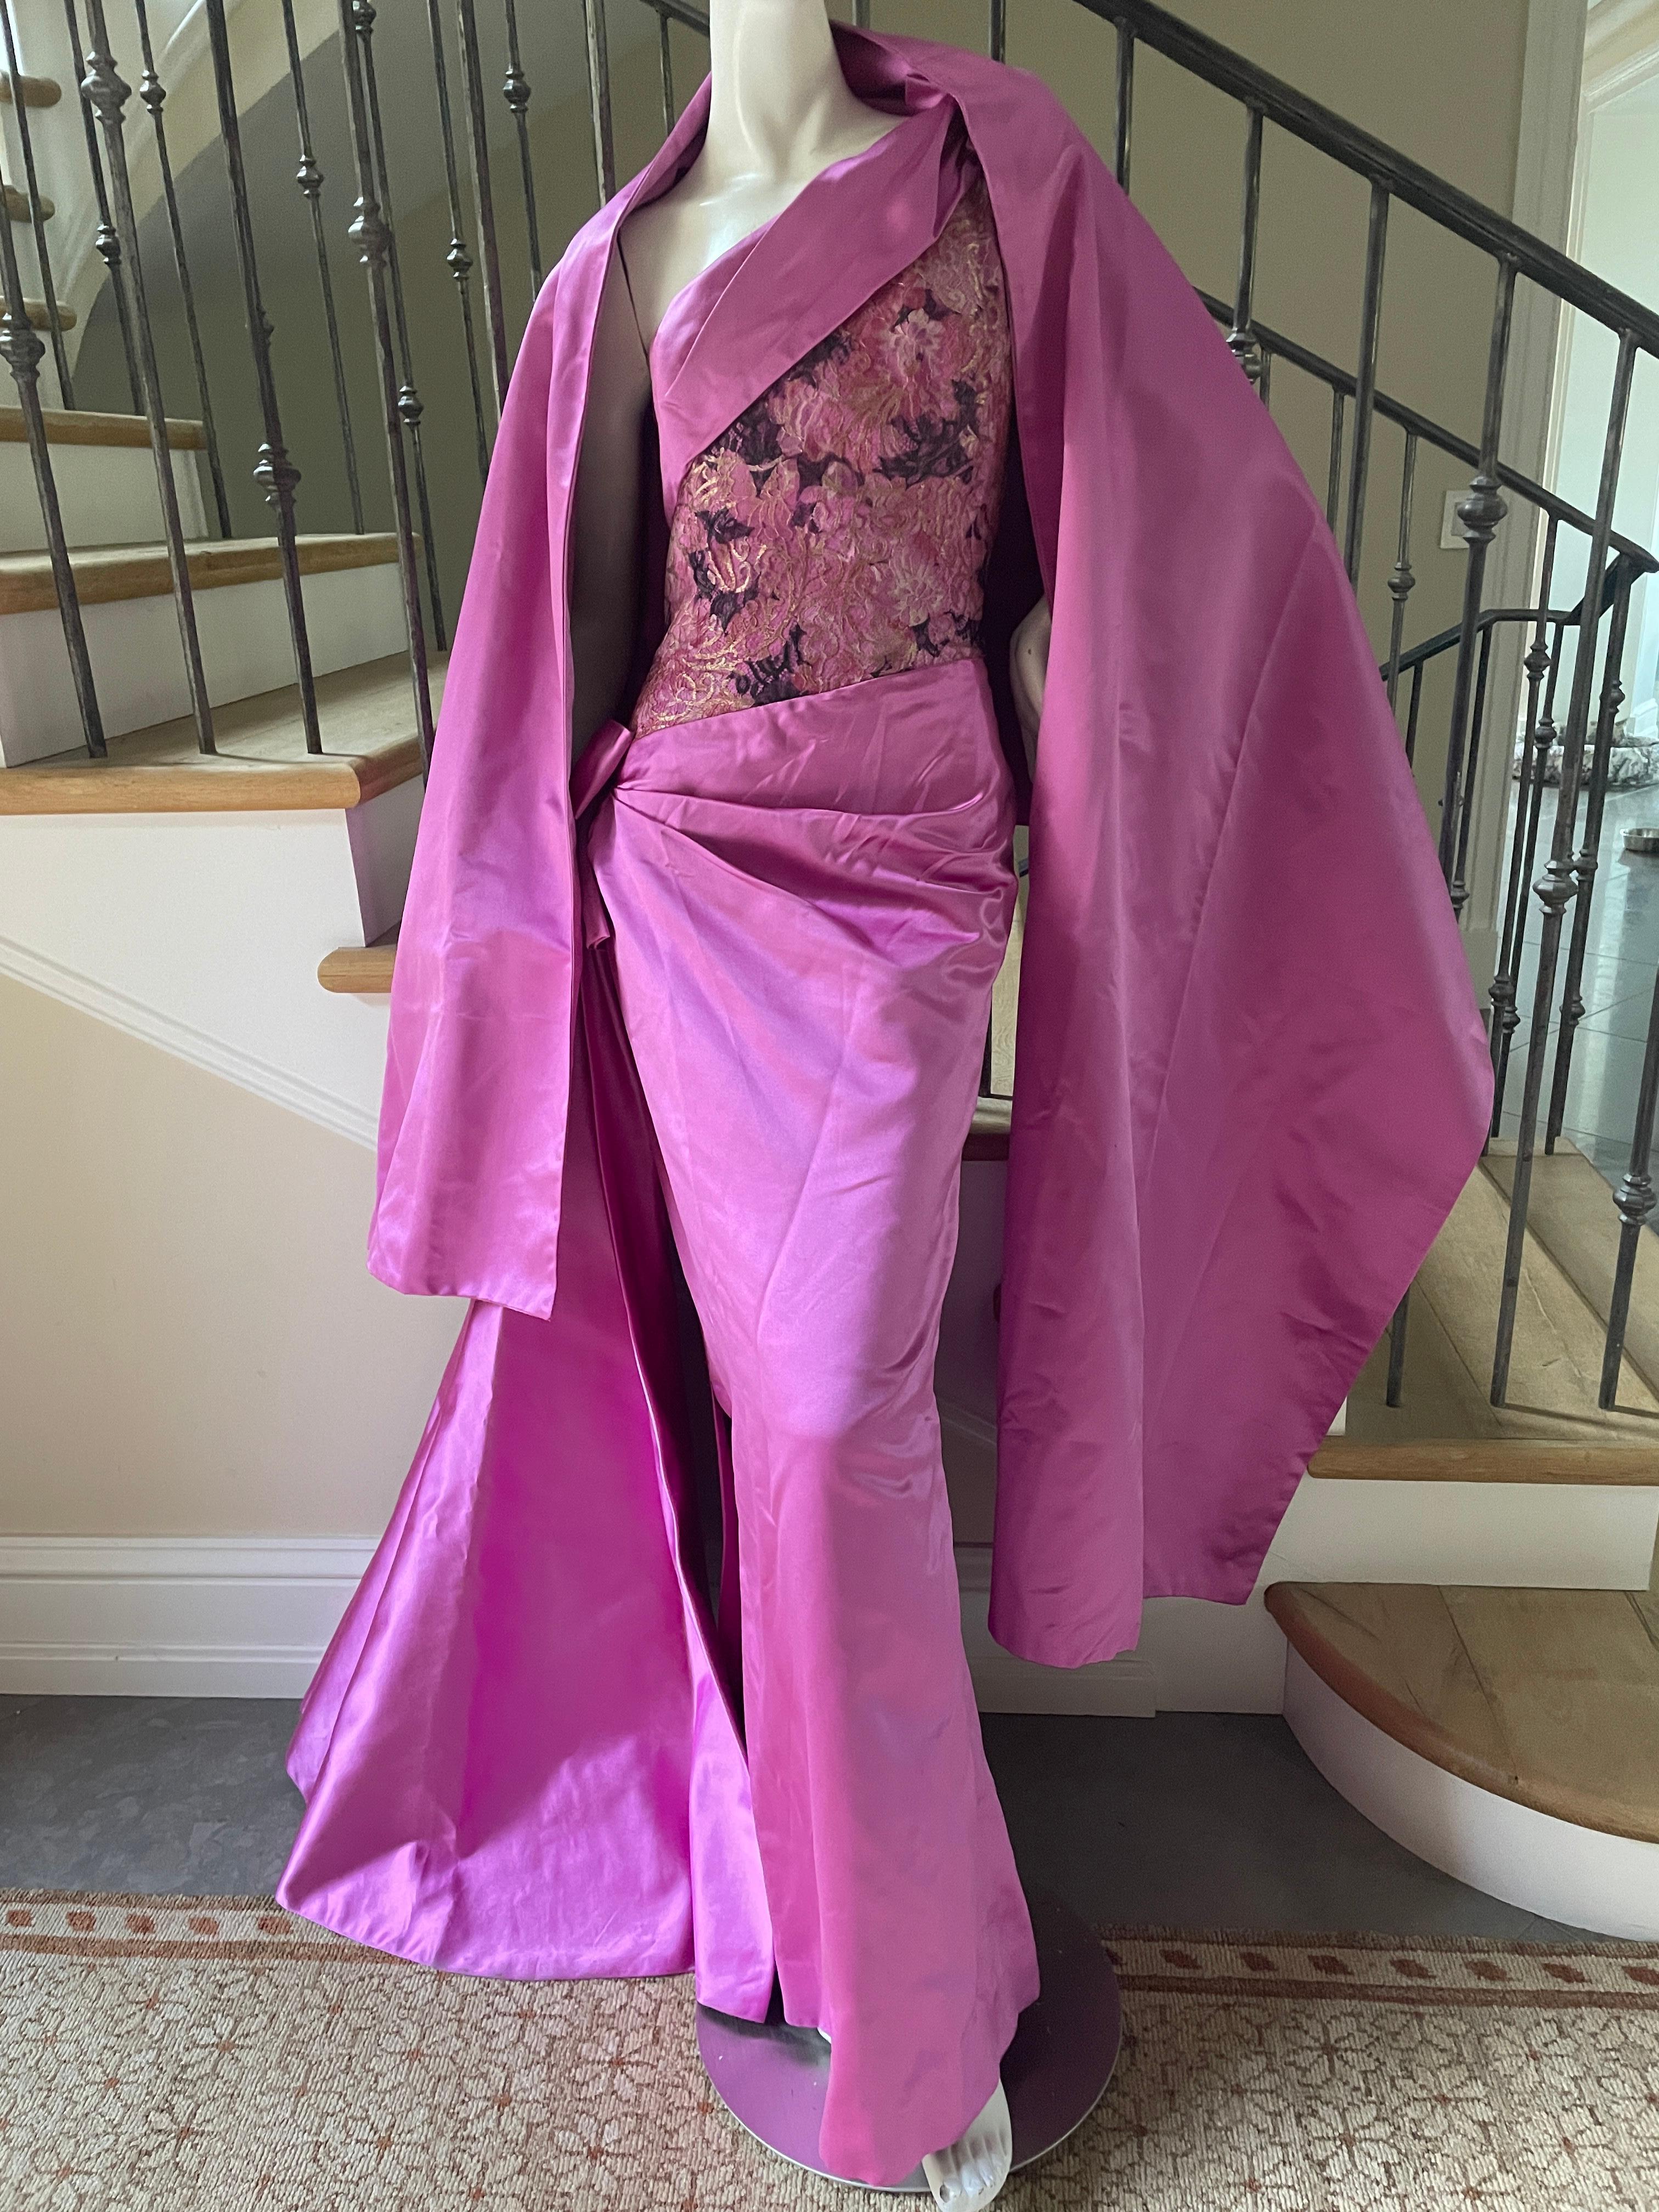 Women's Bellville Sassoon by Lorcan Mullany Vintage Evening Dress with Matching Shawl For Sale